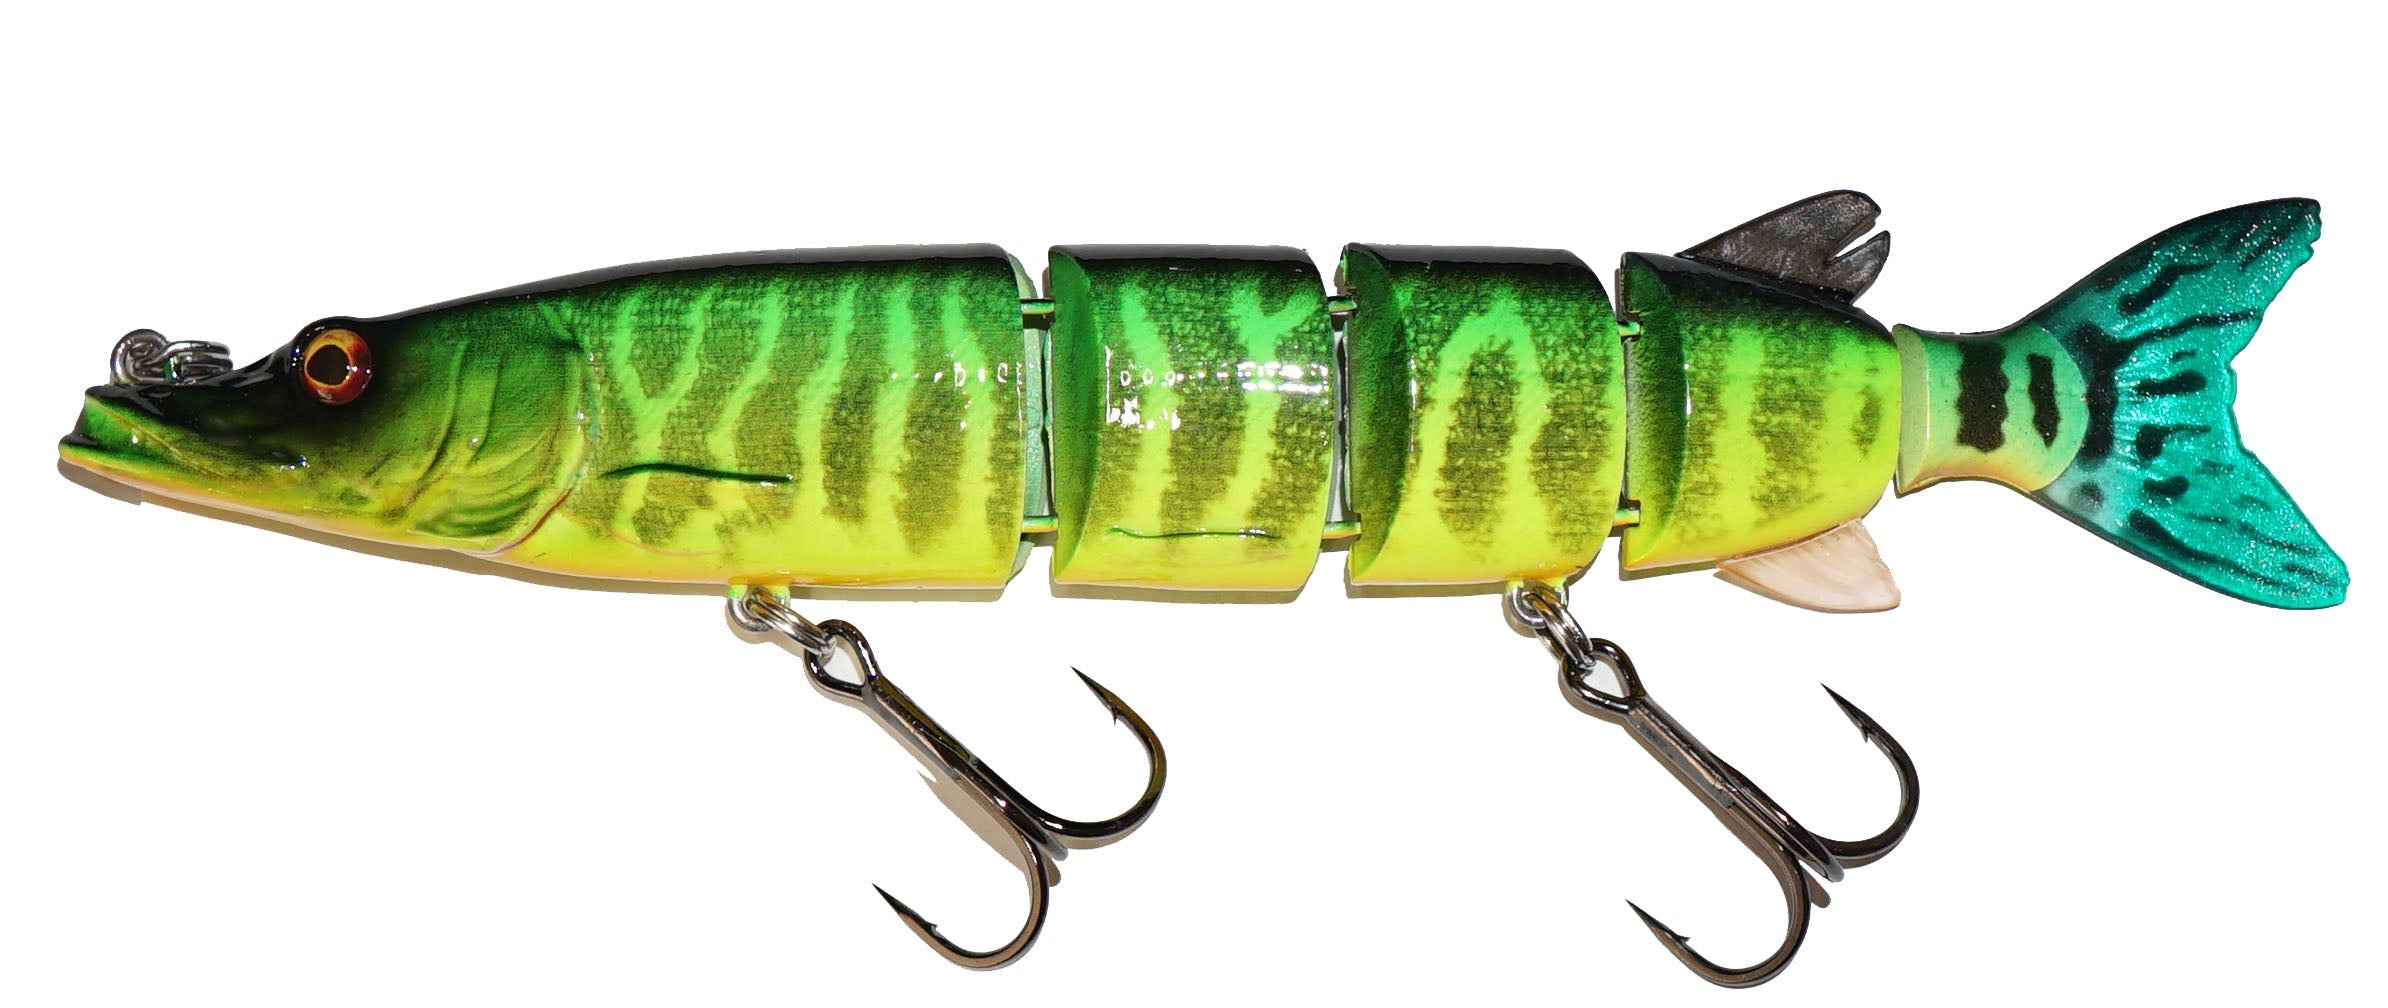 Multiple Variations of Segmented Pike Swimbait for Sale